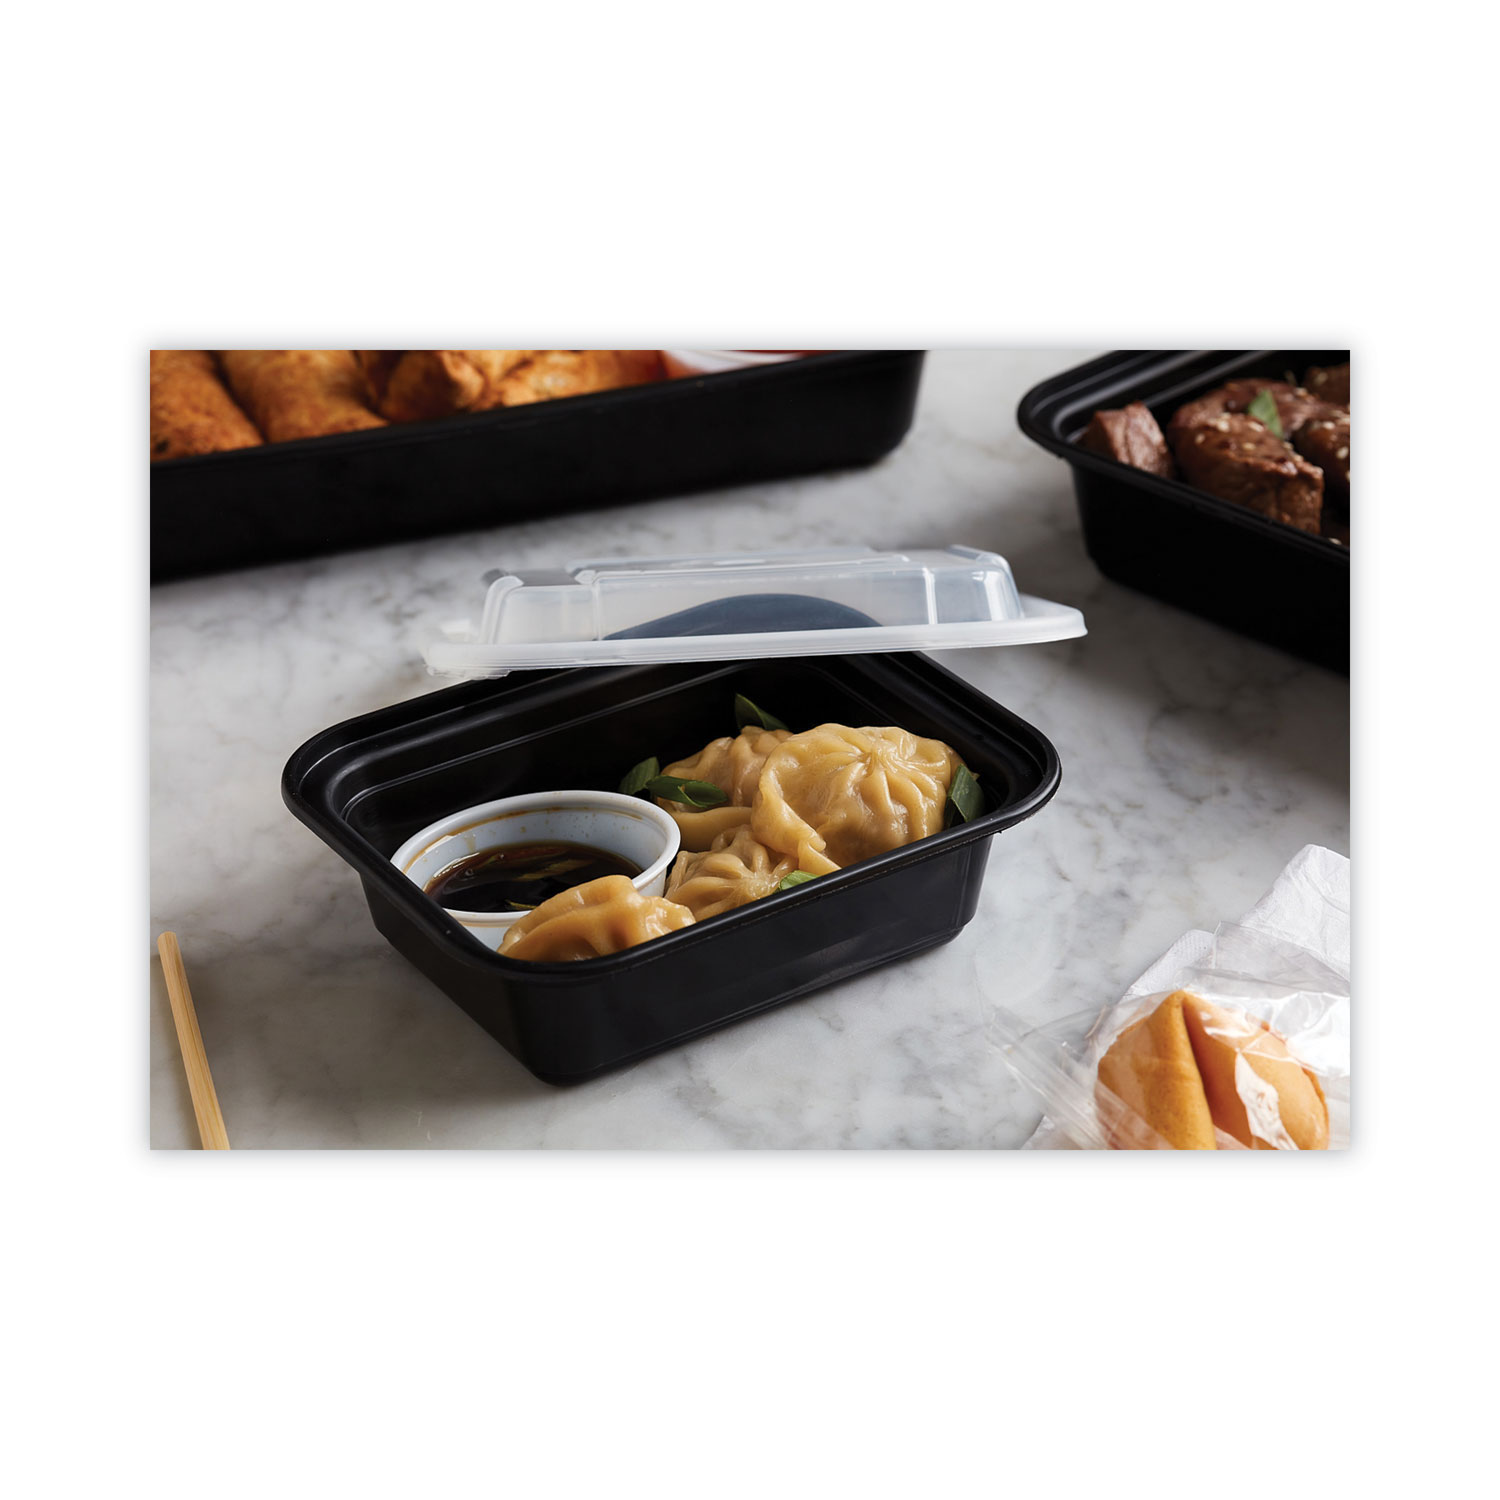 Pactiv Evergreen newspring versatainer microwavable containers,  rectangular, 2-compartment, 30 oz, 6 x 8.5 x 2.5, black/clear, plastic,  150/ct